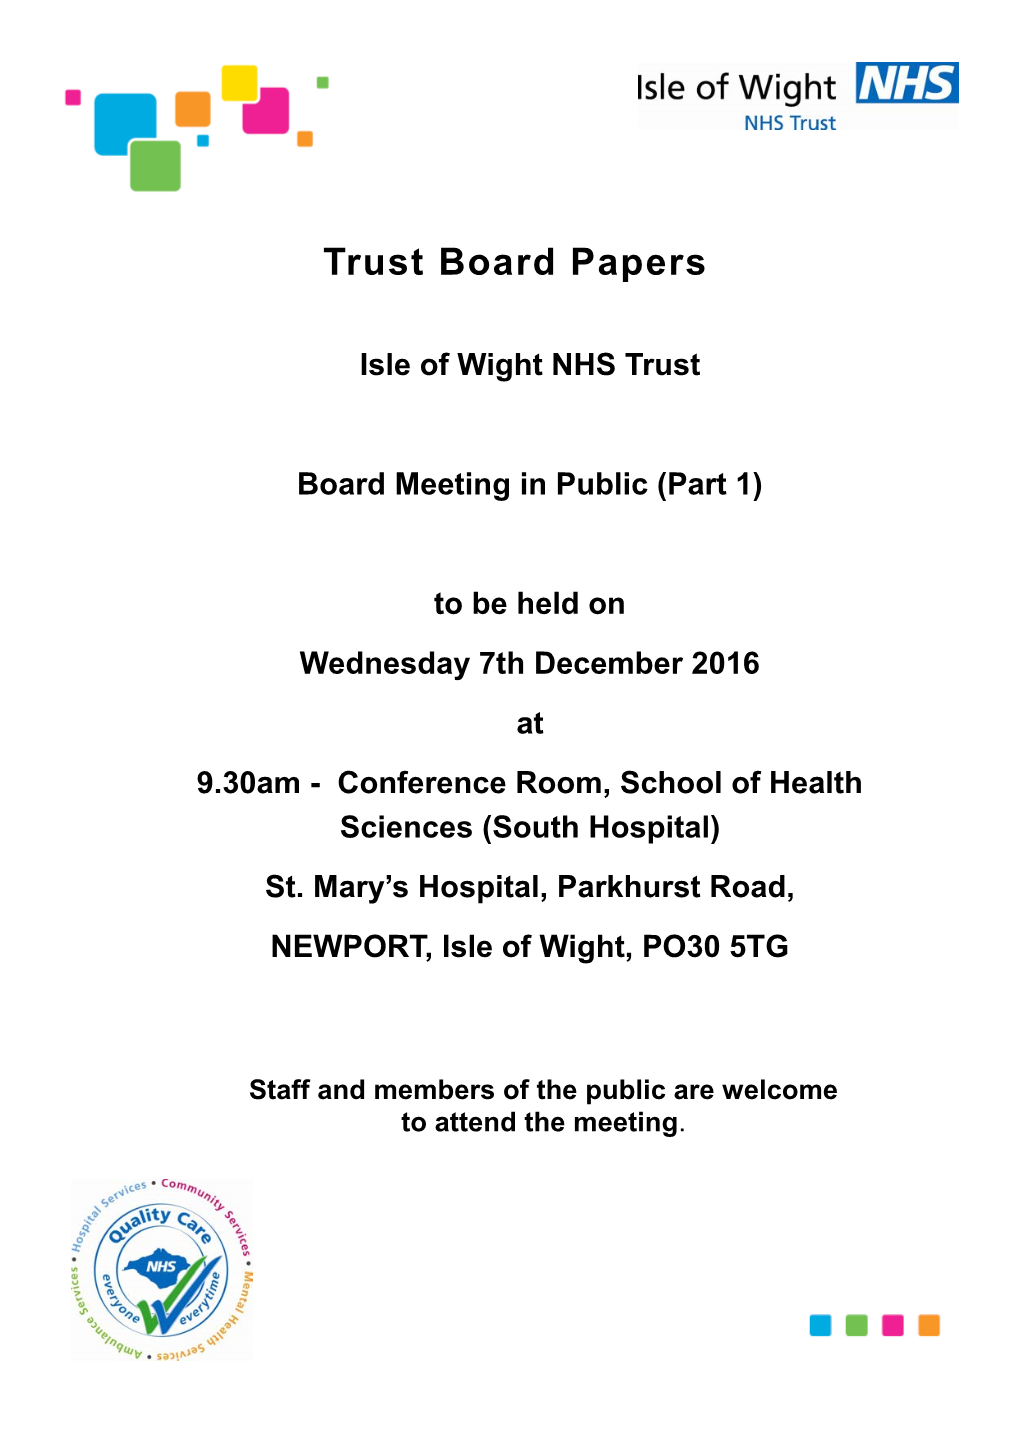 Trust Board Papers